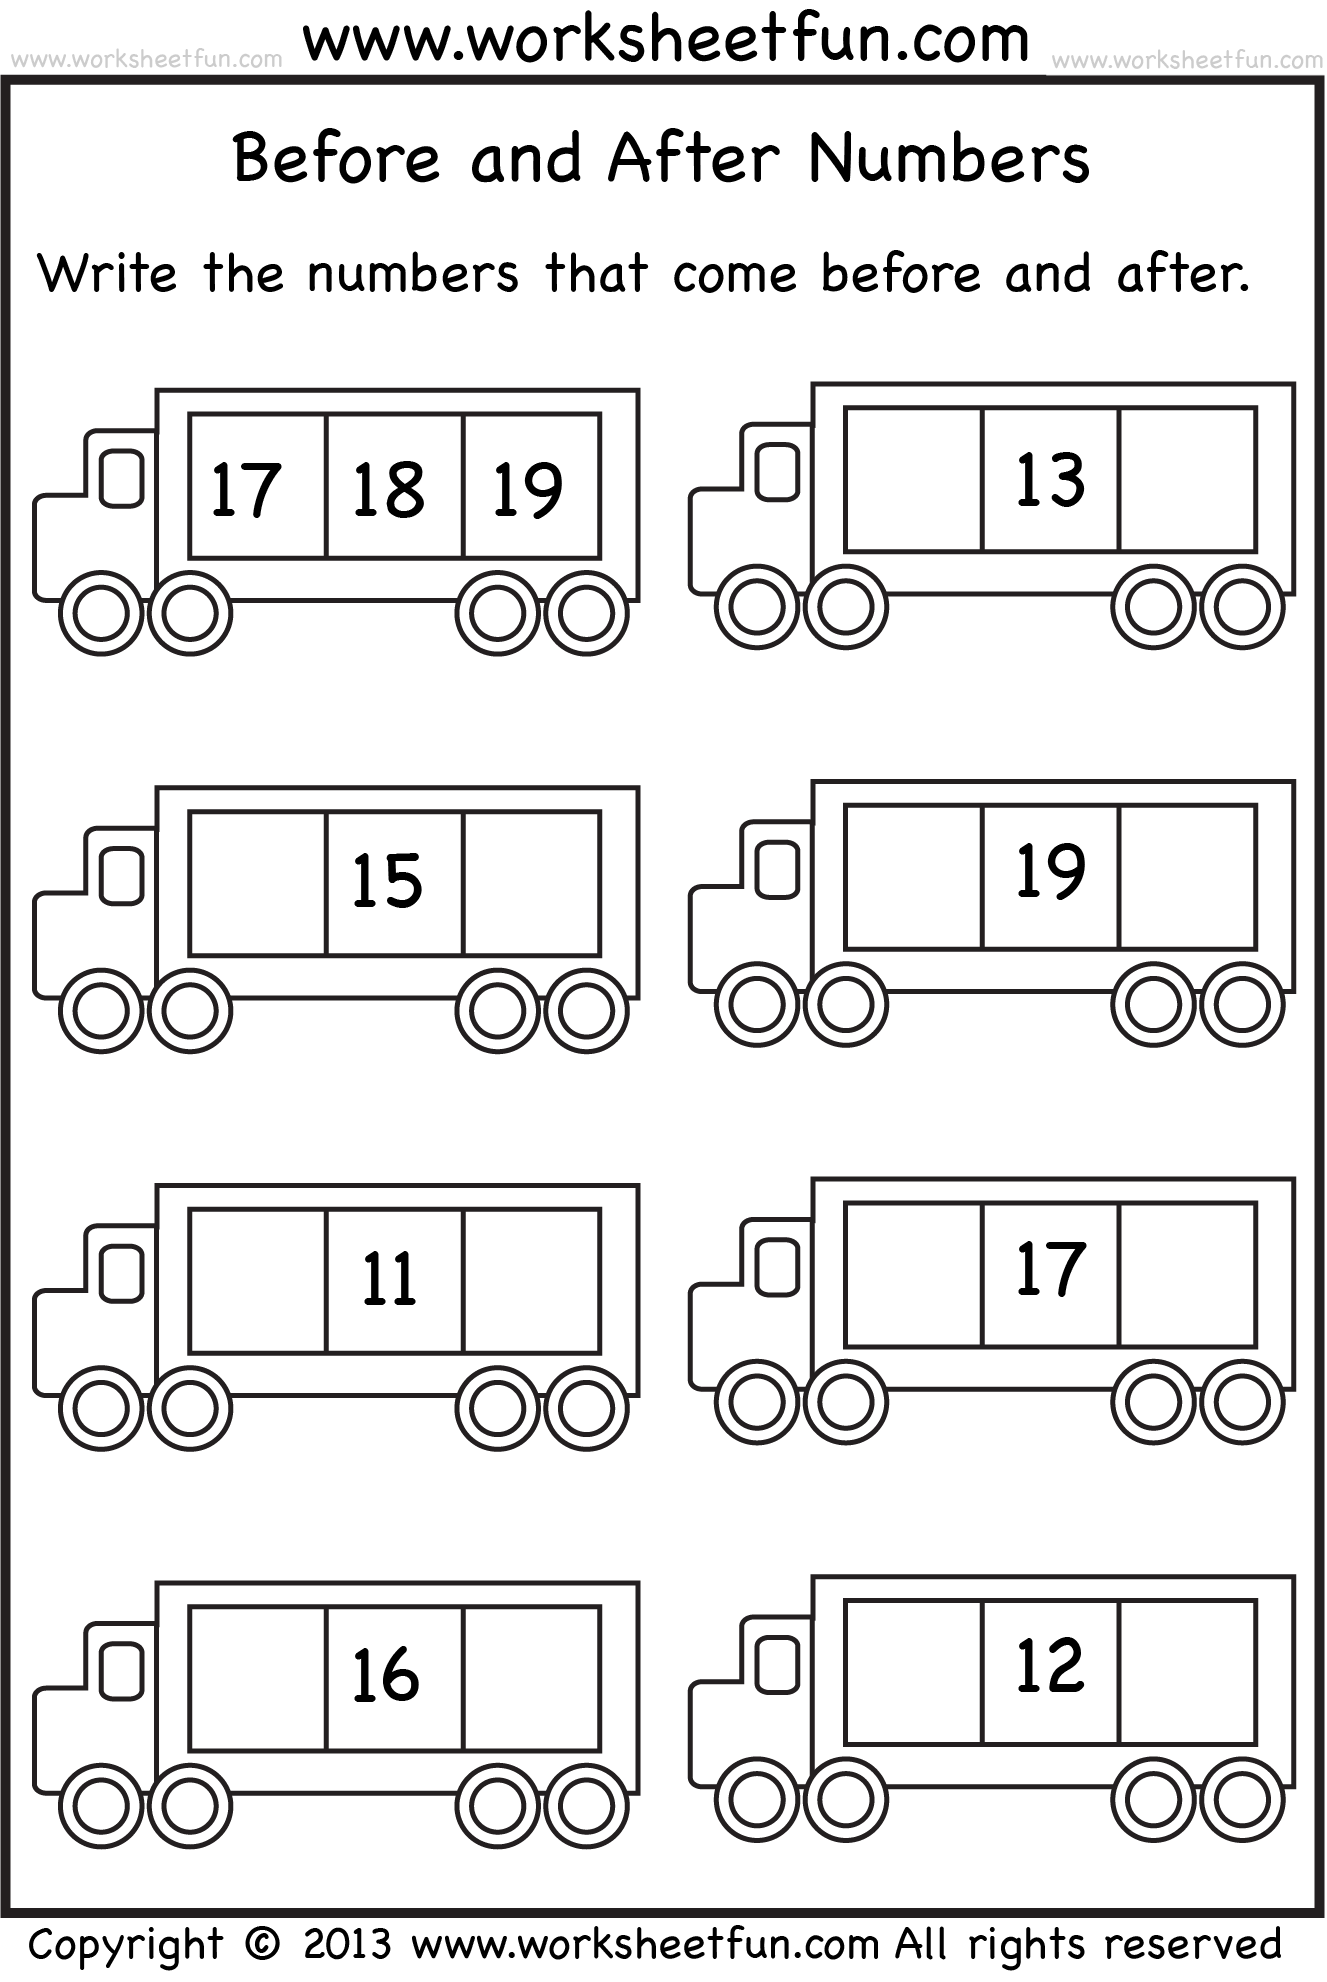 Before and After Numbers – 5 Worksheets / FREE Printable Worksheets ...